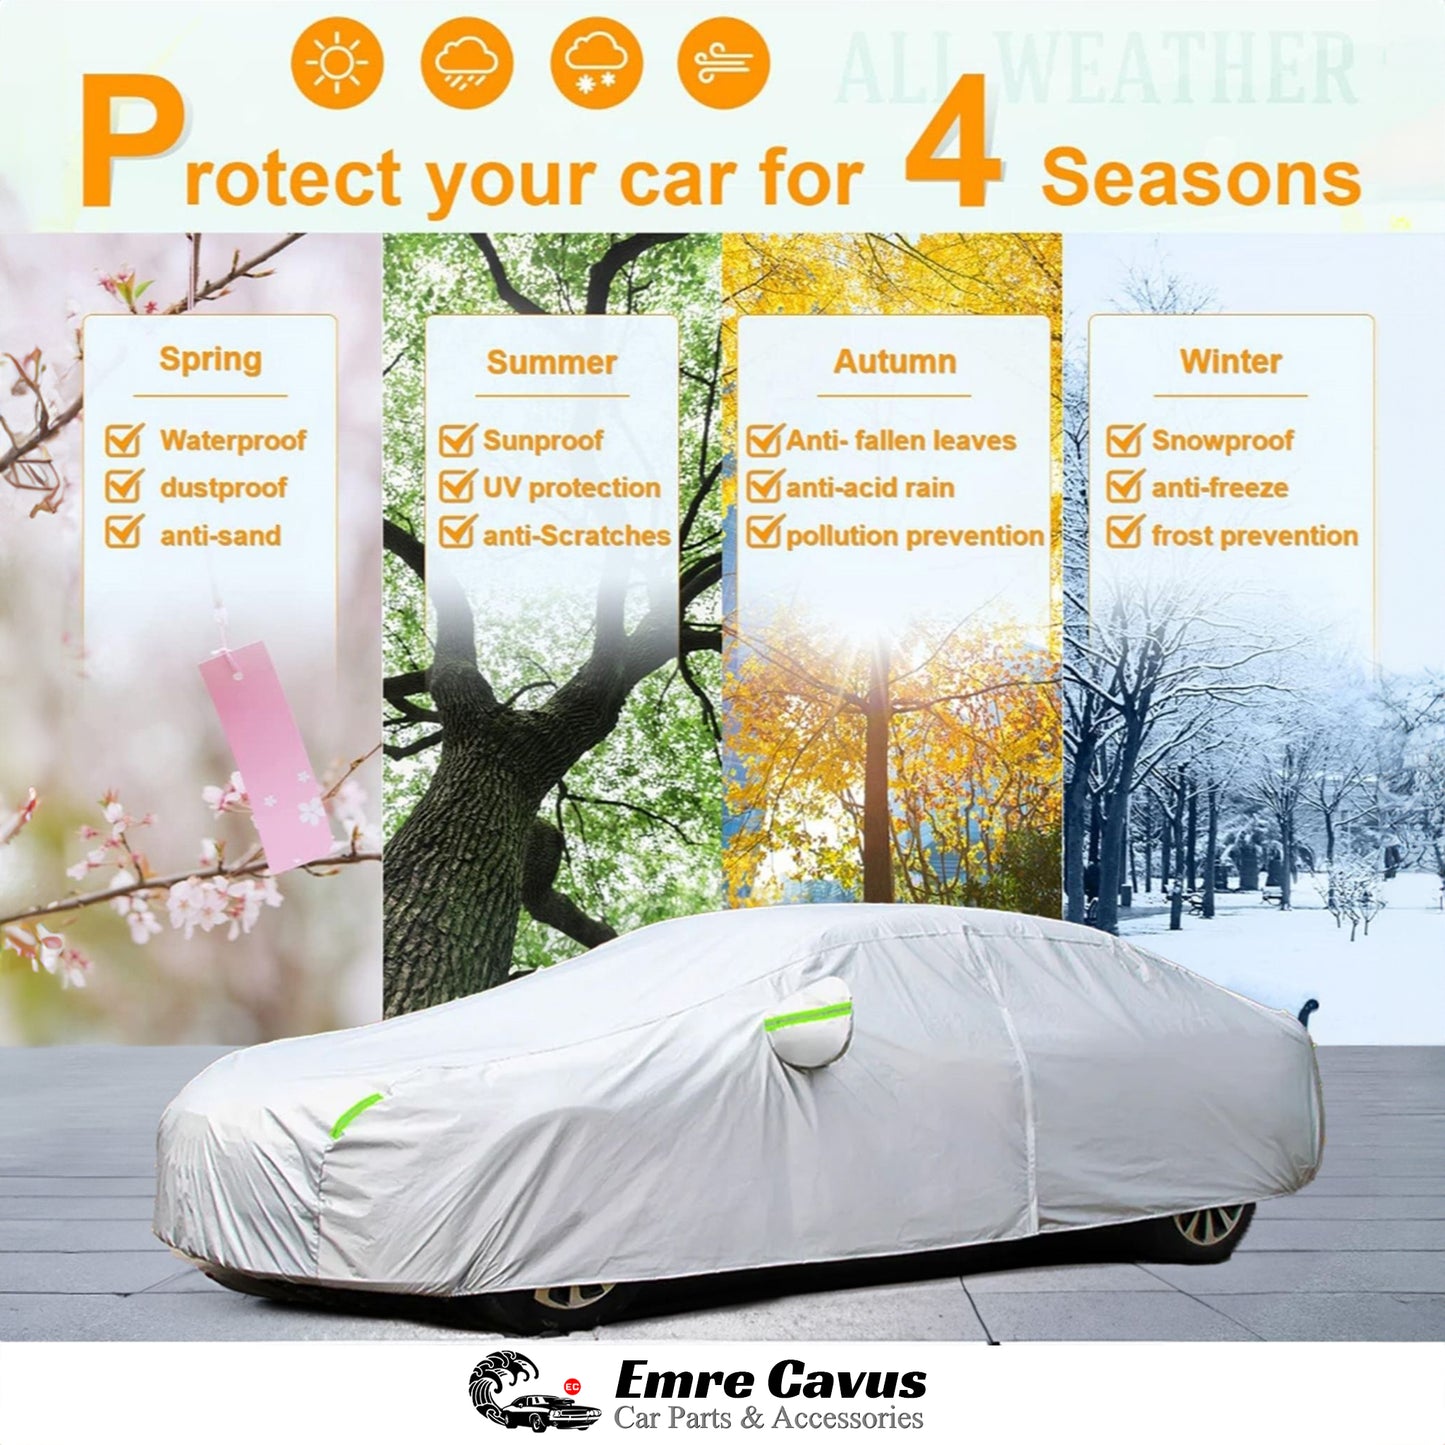 EC Waterproof Car Cover for Automobiles, All Weather Snowproof Windproof Rain Sun UV Protection, Outdoor Full Cover with Zipper, Size A2 3XL Universal Fit for Sedan (186-193 inch)